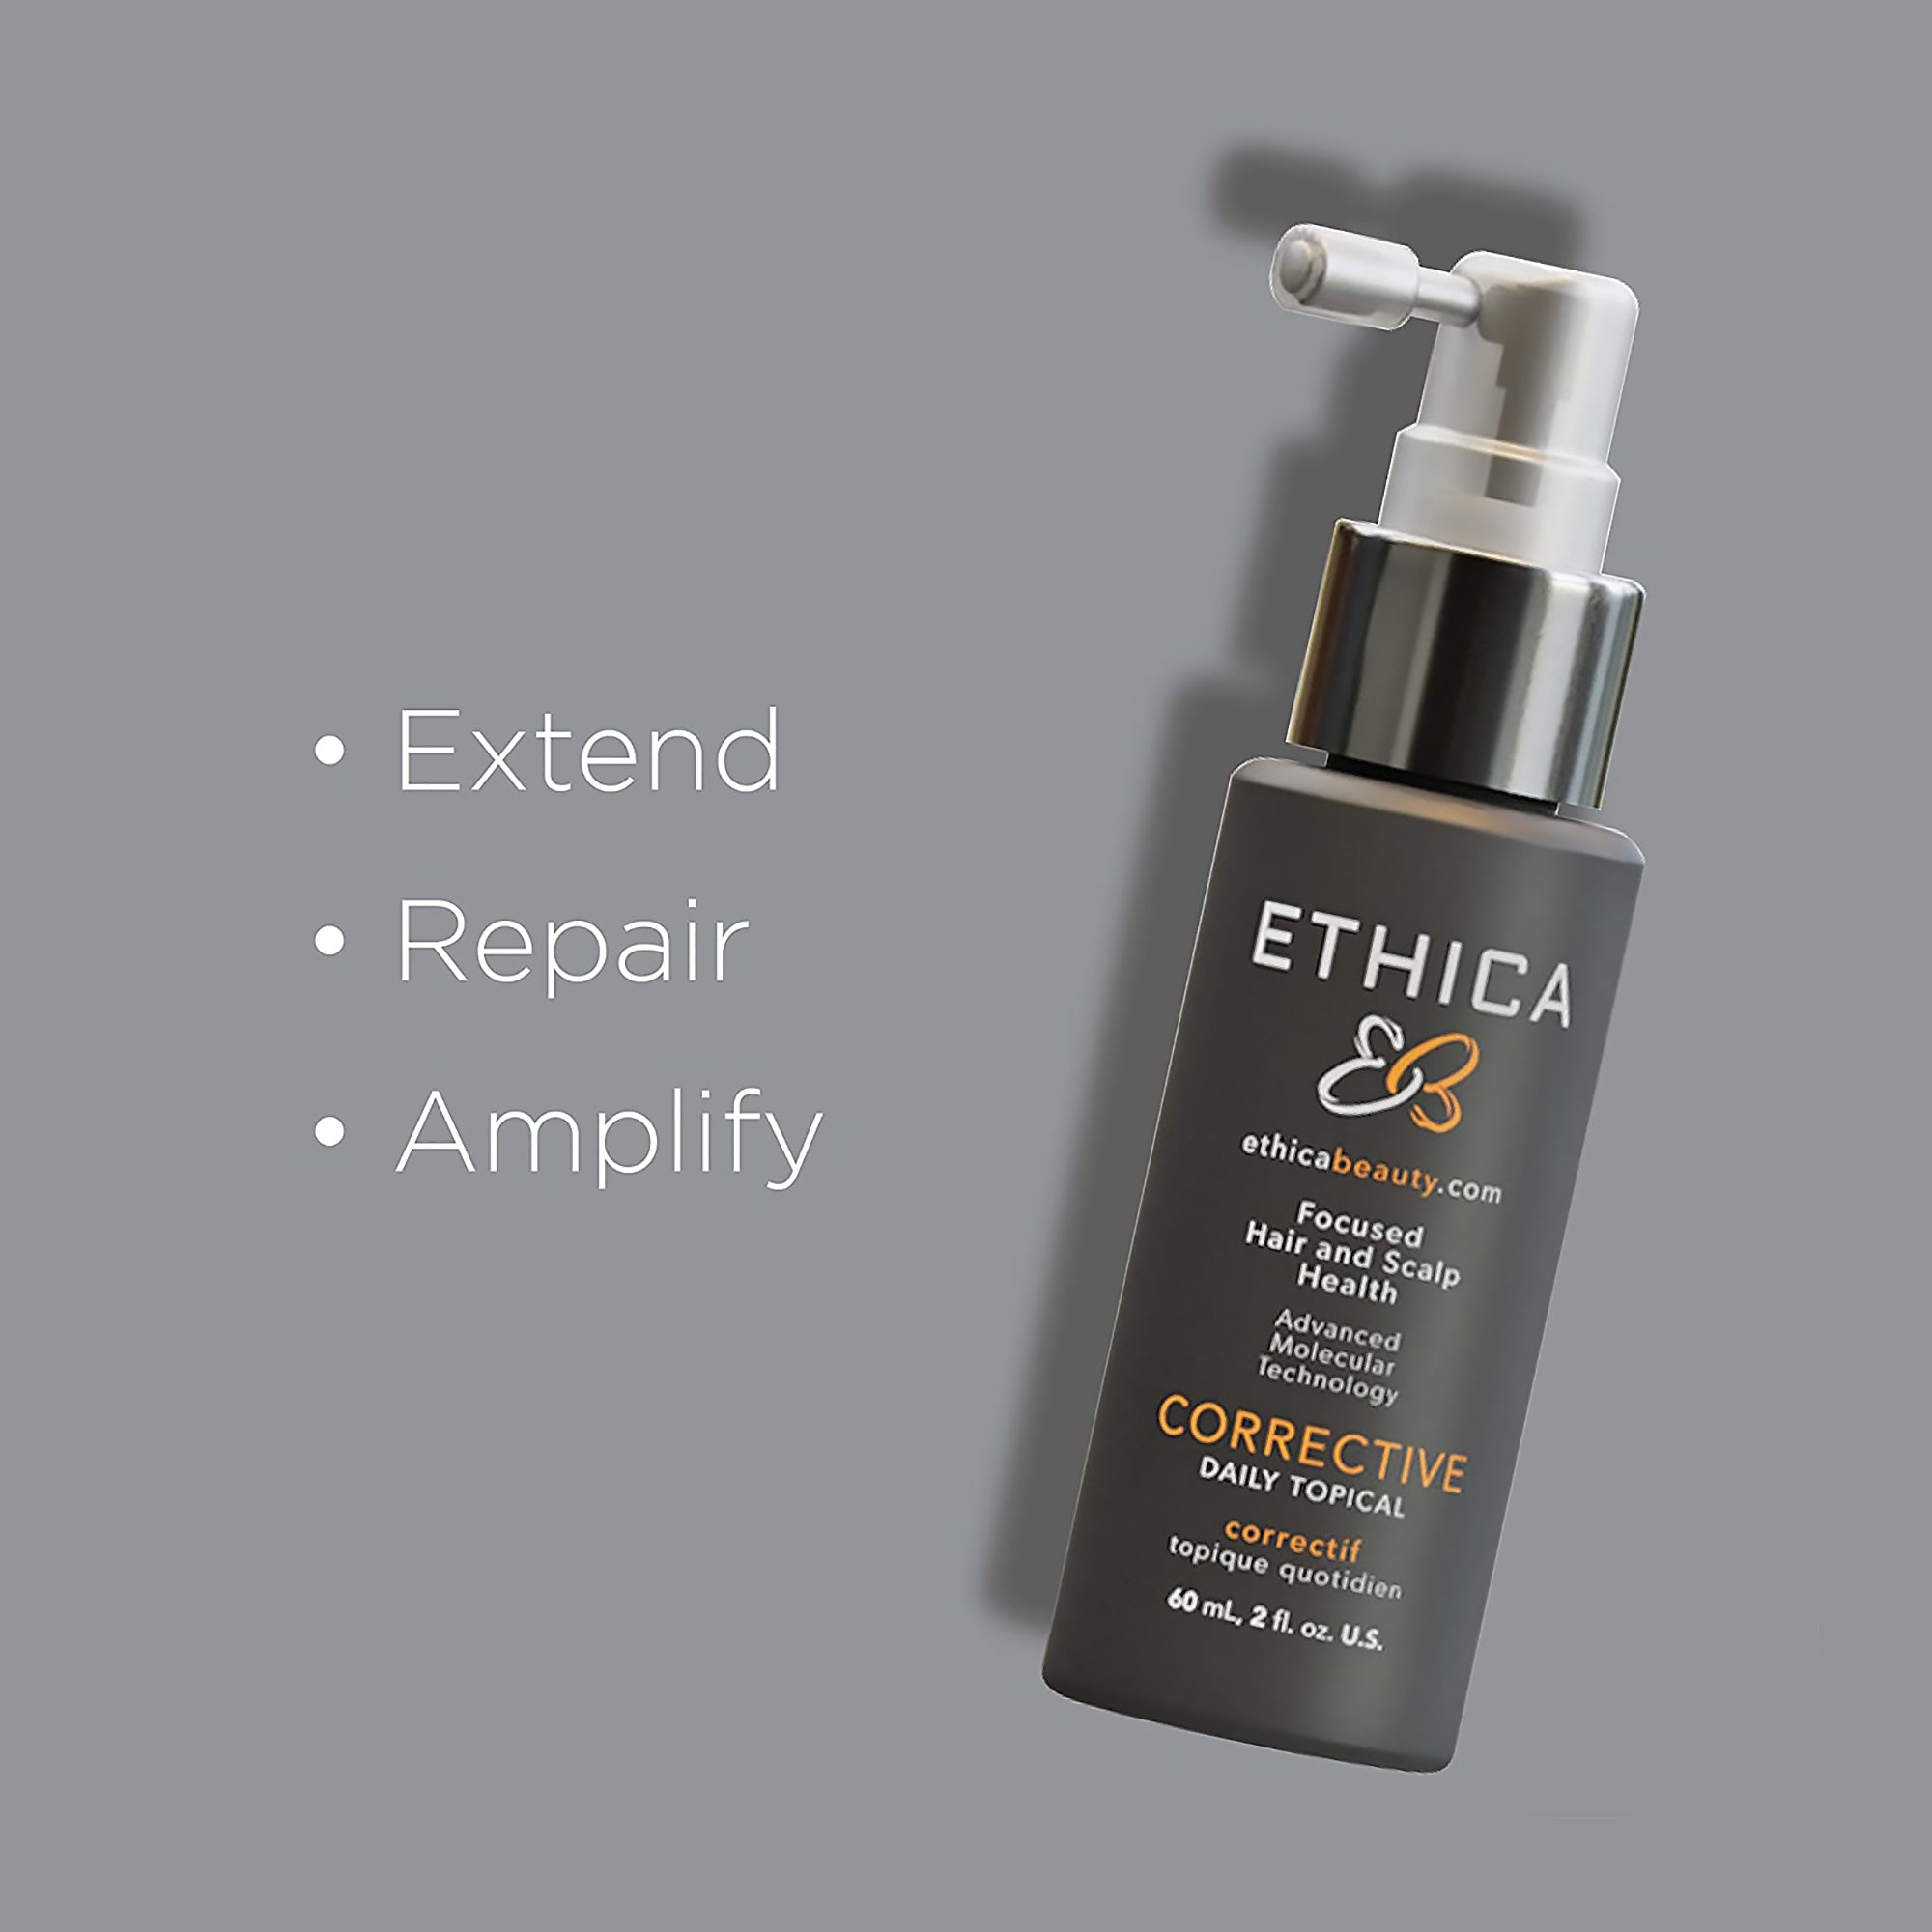 Ethica Beauty Corrective Daily Topical Treatment / 2OZ